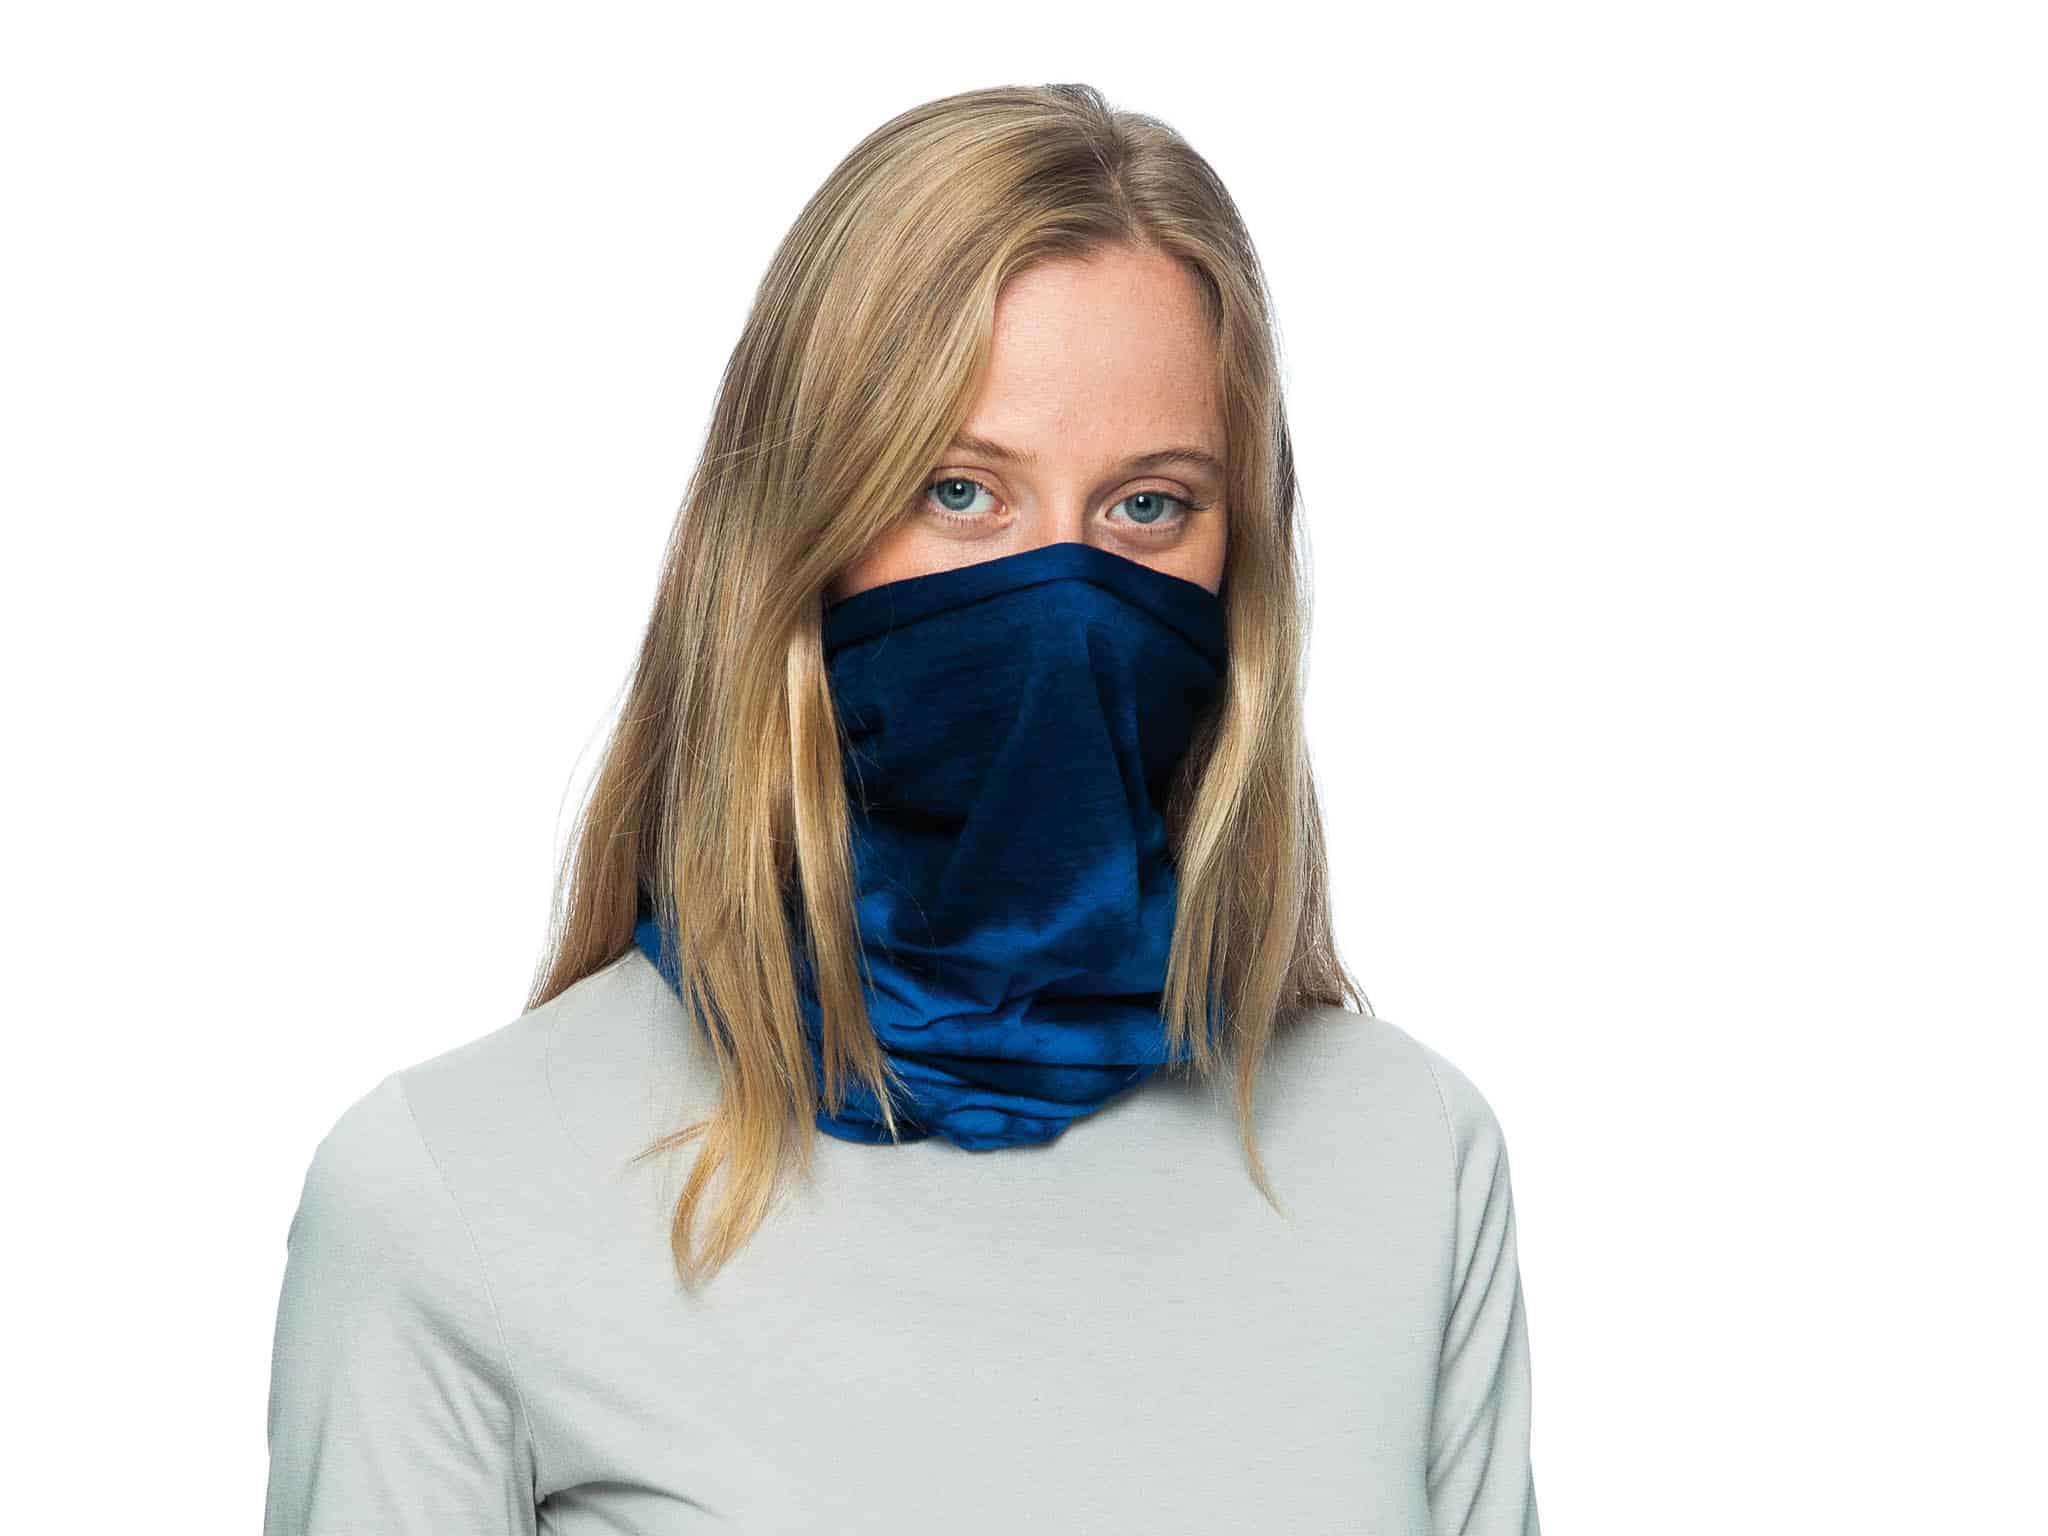 A studio landscape shot of a young woman wearing a Wool Buff® as face mask. She is blond, wearing a white shirt & standing in front of a white background. The tye-died blue Wool Buff® stands out. Source: buff.eu © Distributed for the promotion of the Wool Buff®